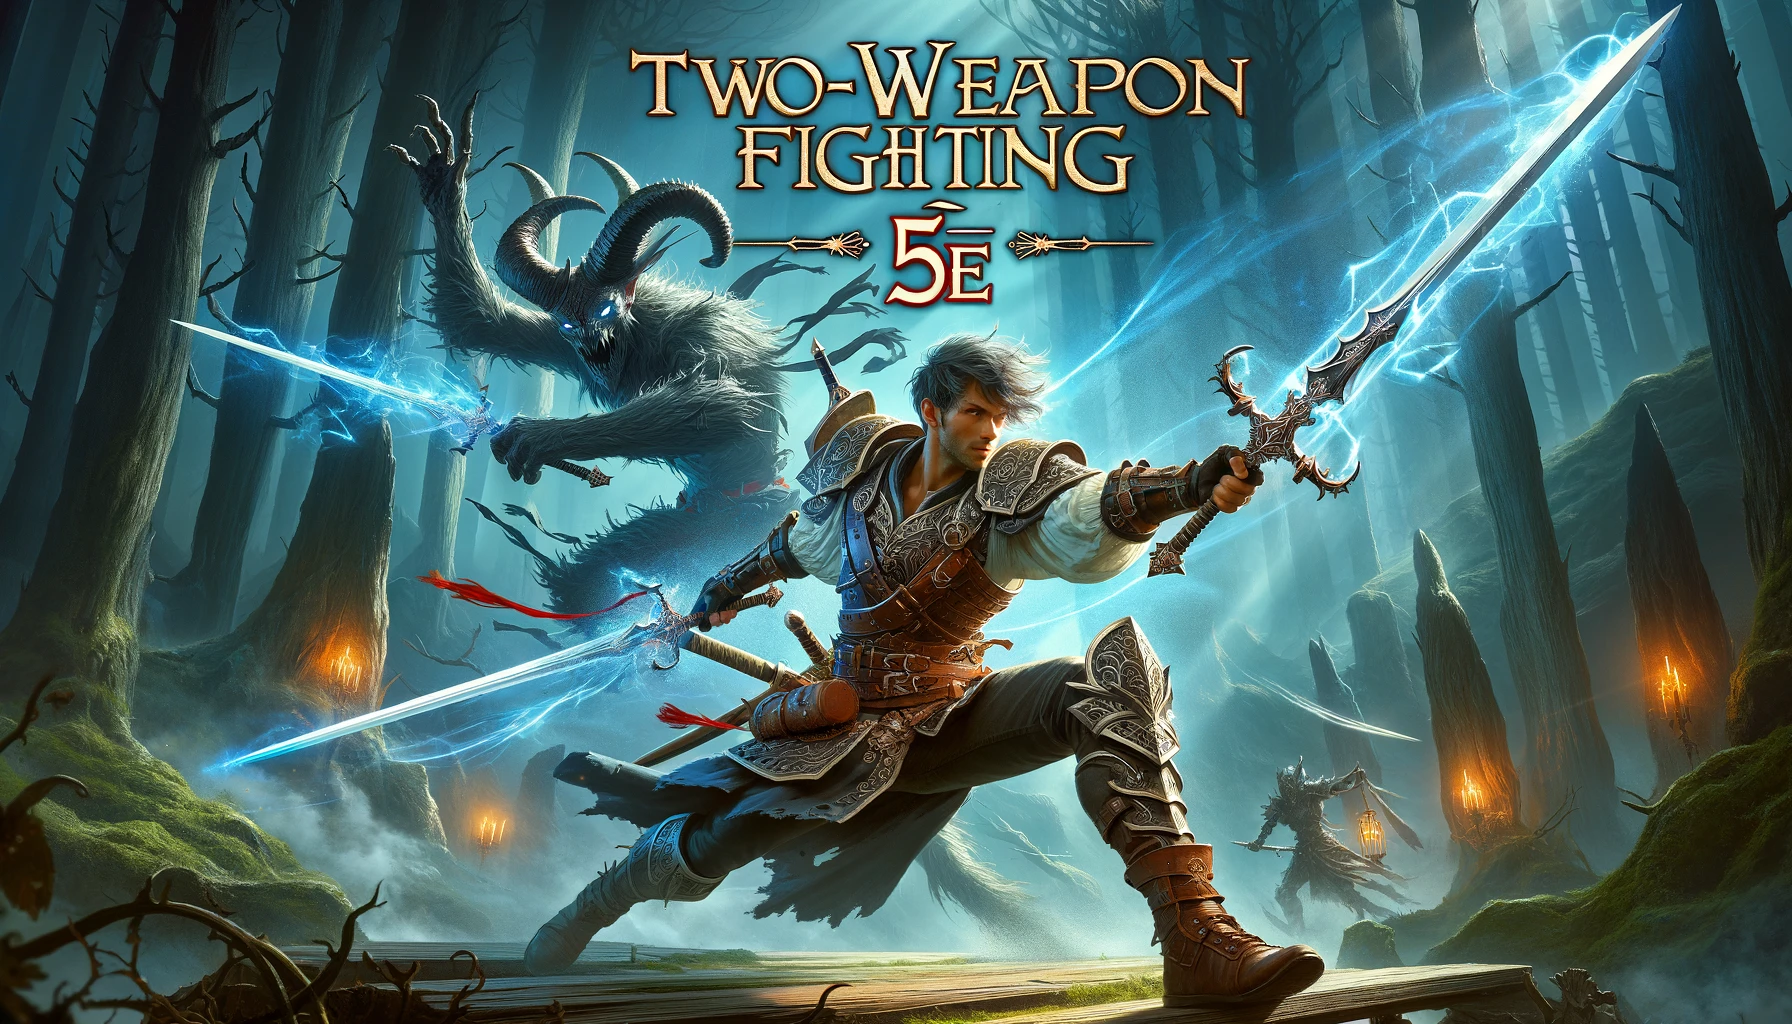 TWO-WEAPON FIGHTING 5E